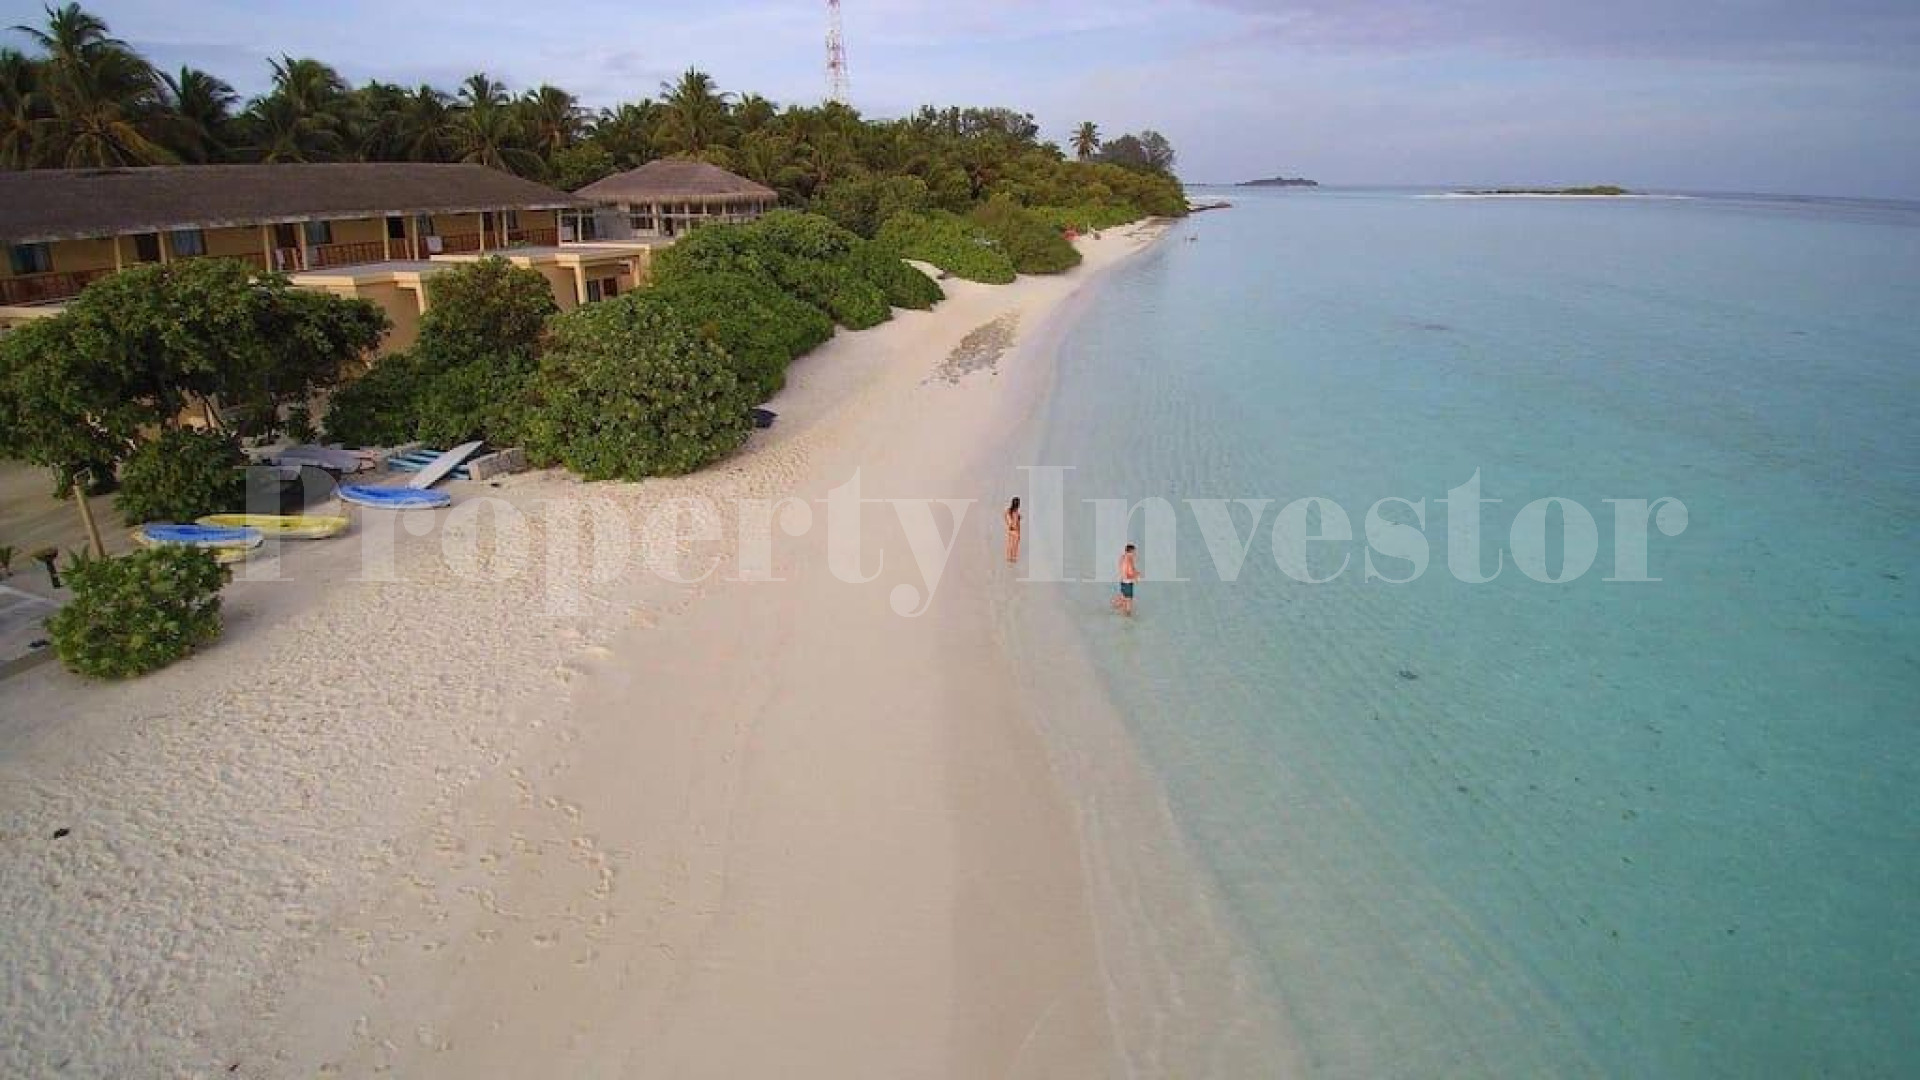 Functioning 42 Room Resort with 2 Hectare 50 Villa Development Expansion Plan for Sale in the Maldives